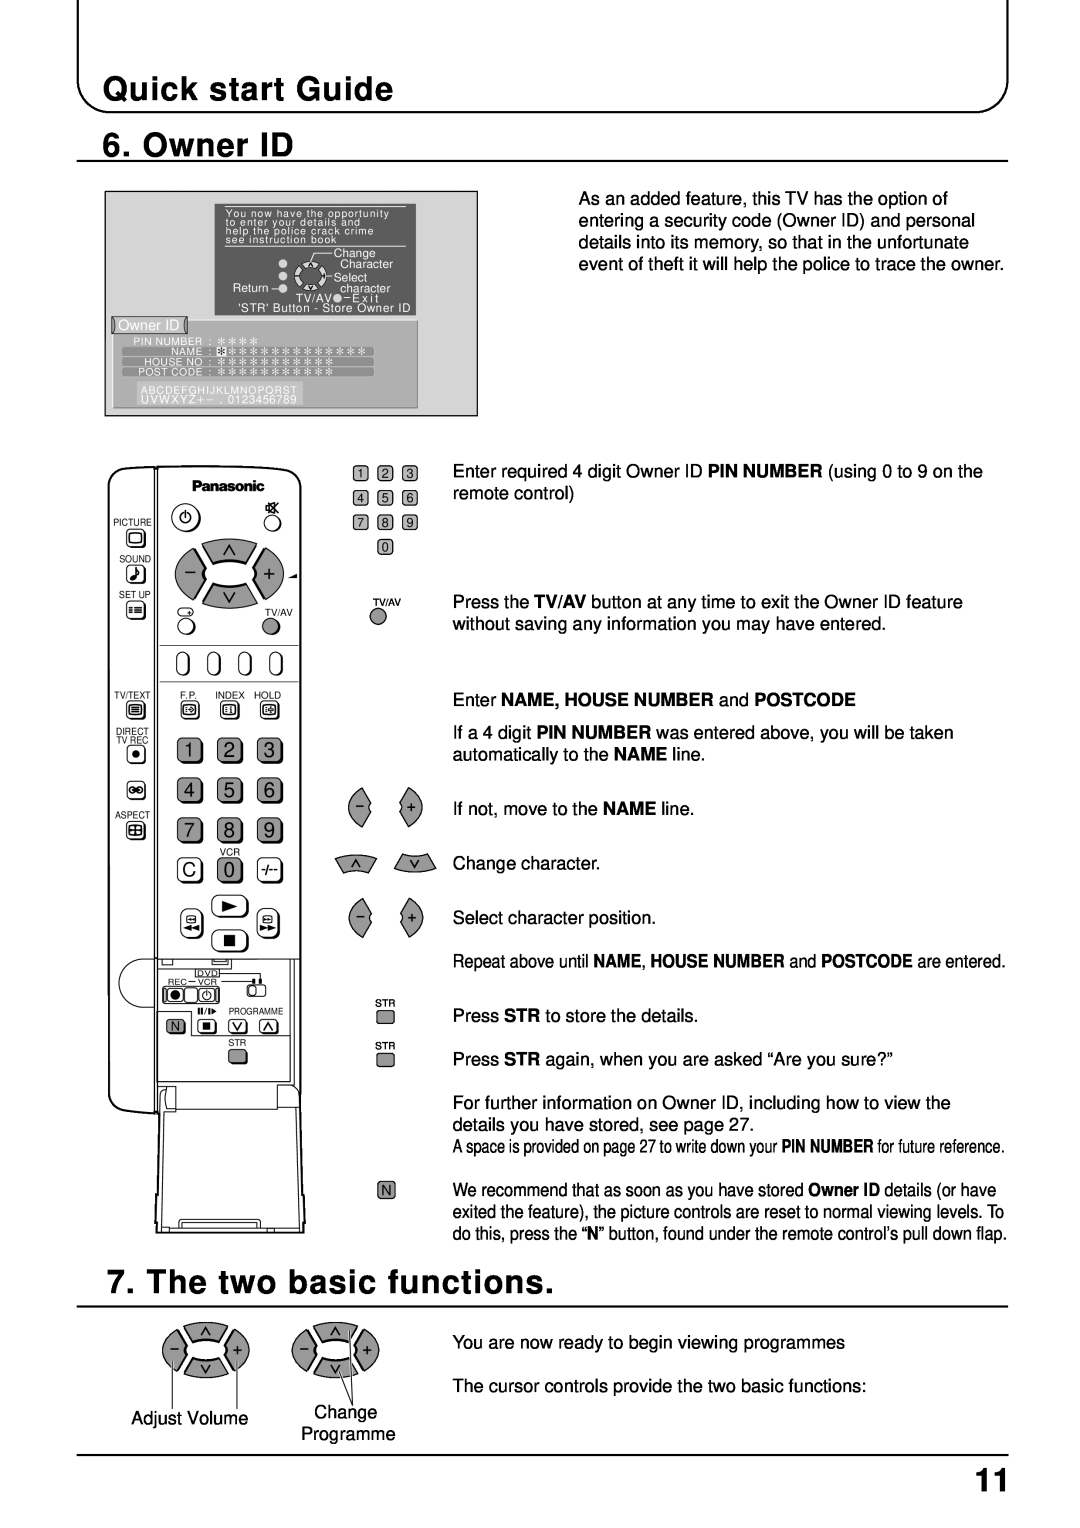 Panasonic TX-22LT2 Owner ID, The two basic functions, Quick start Guide, 1 2 4 5, Enter NAME, HOUSE NUMBER and POSTCODE 